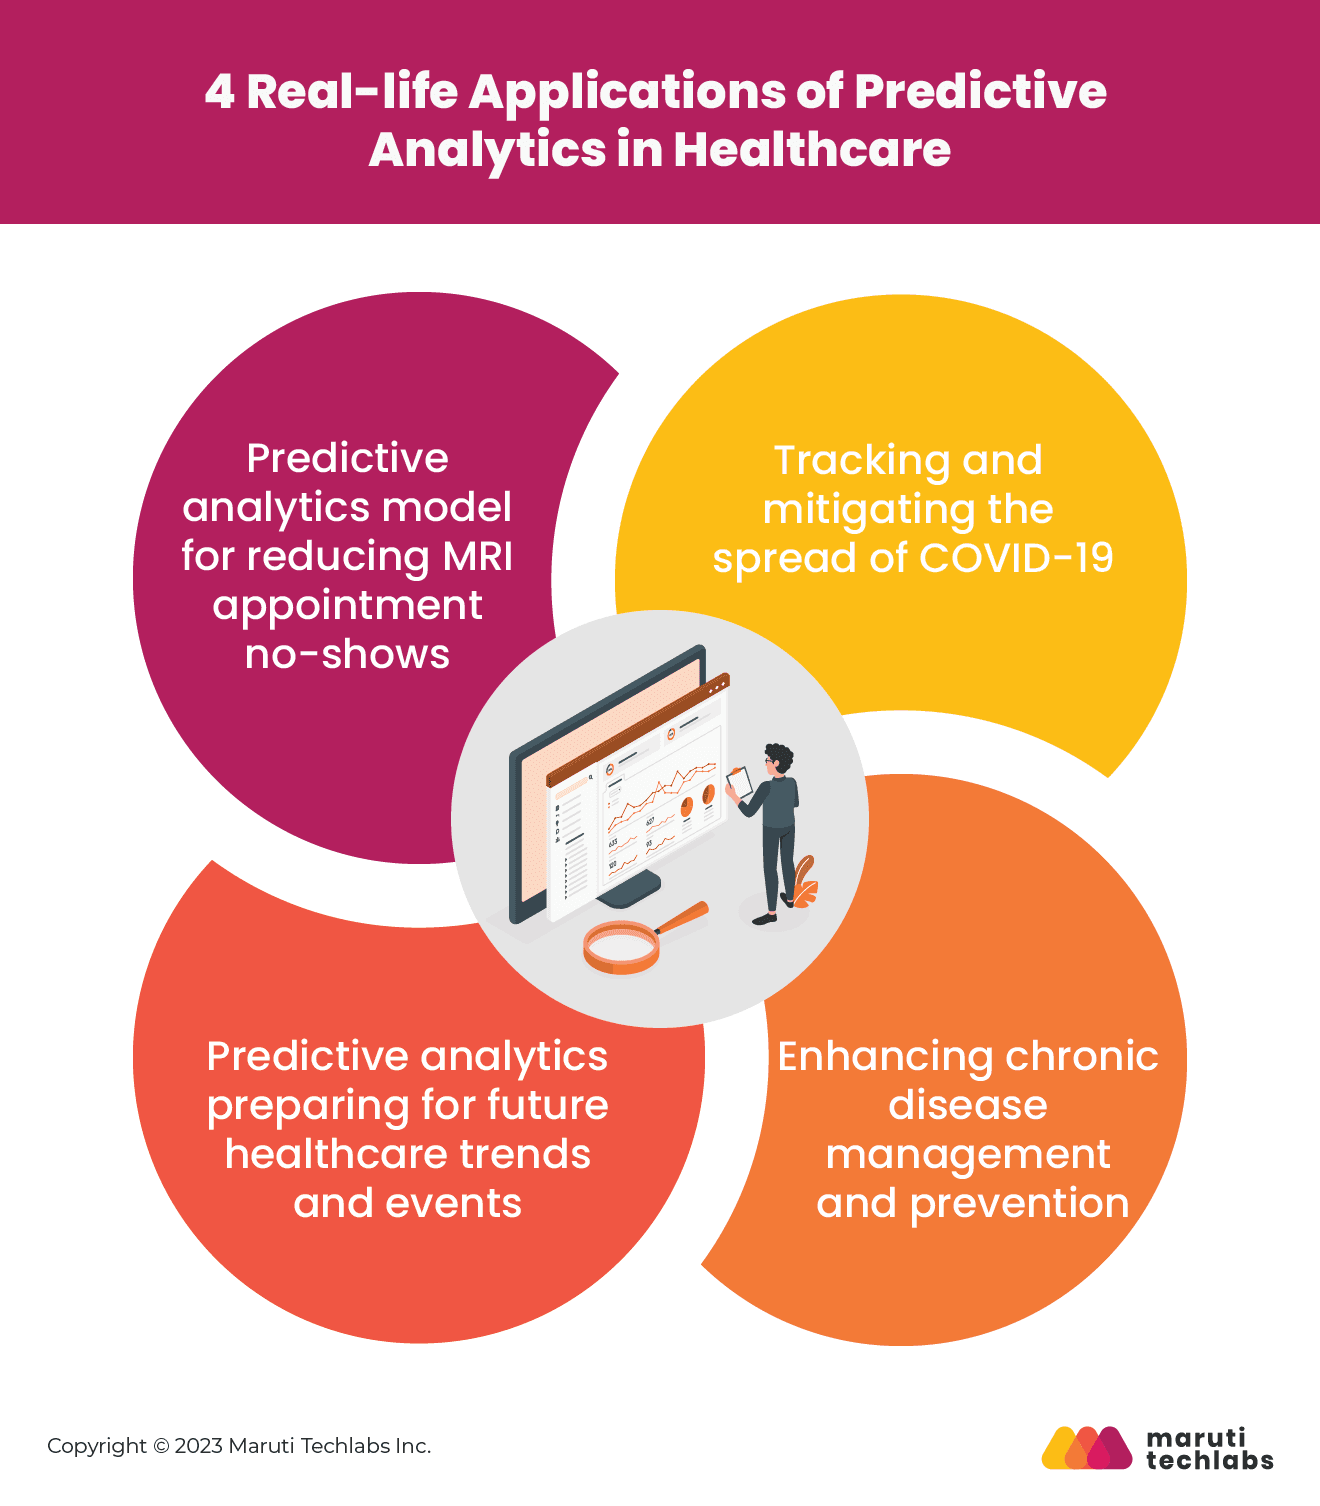 4 Real-life Applications of Predictive Analytics in Healthcare